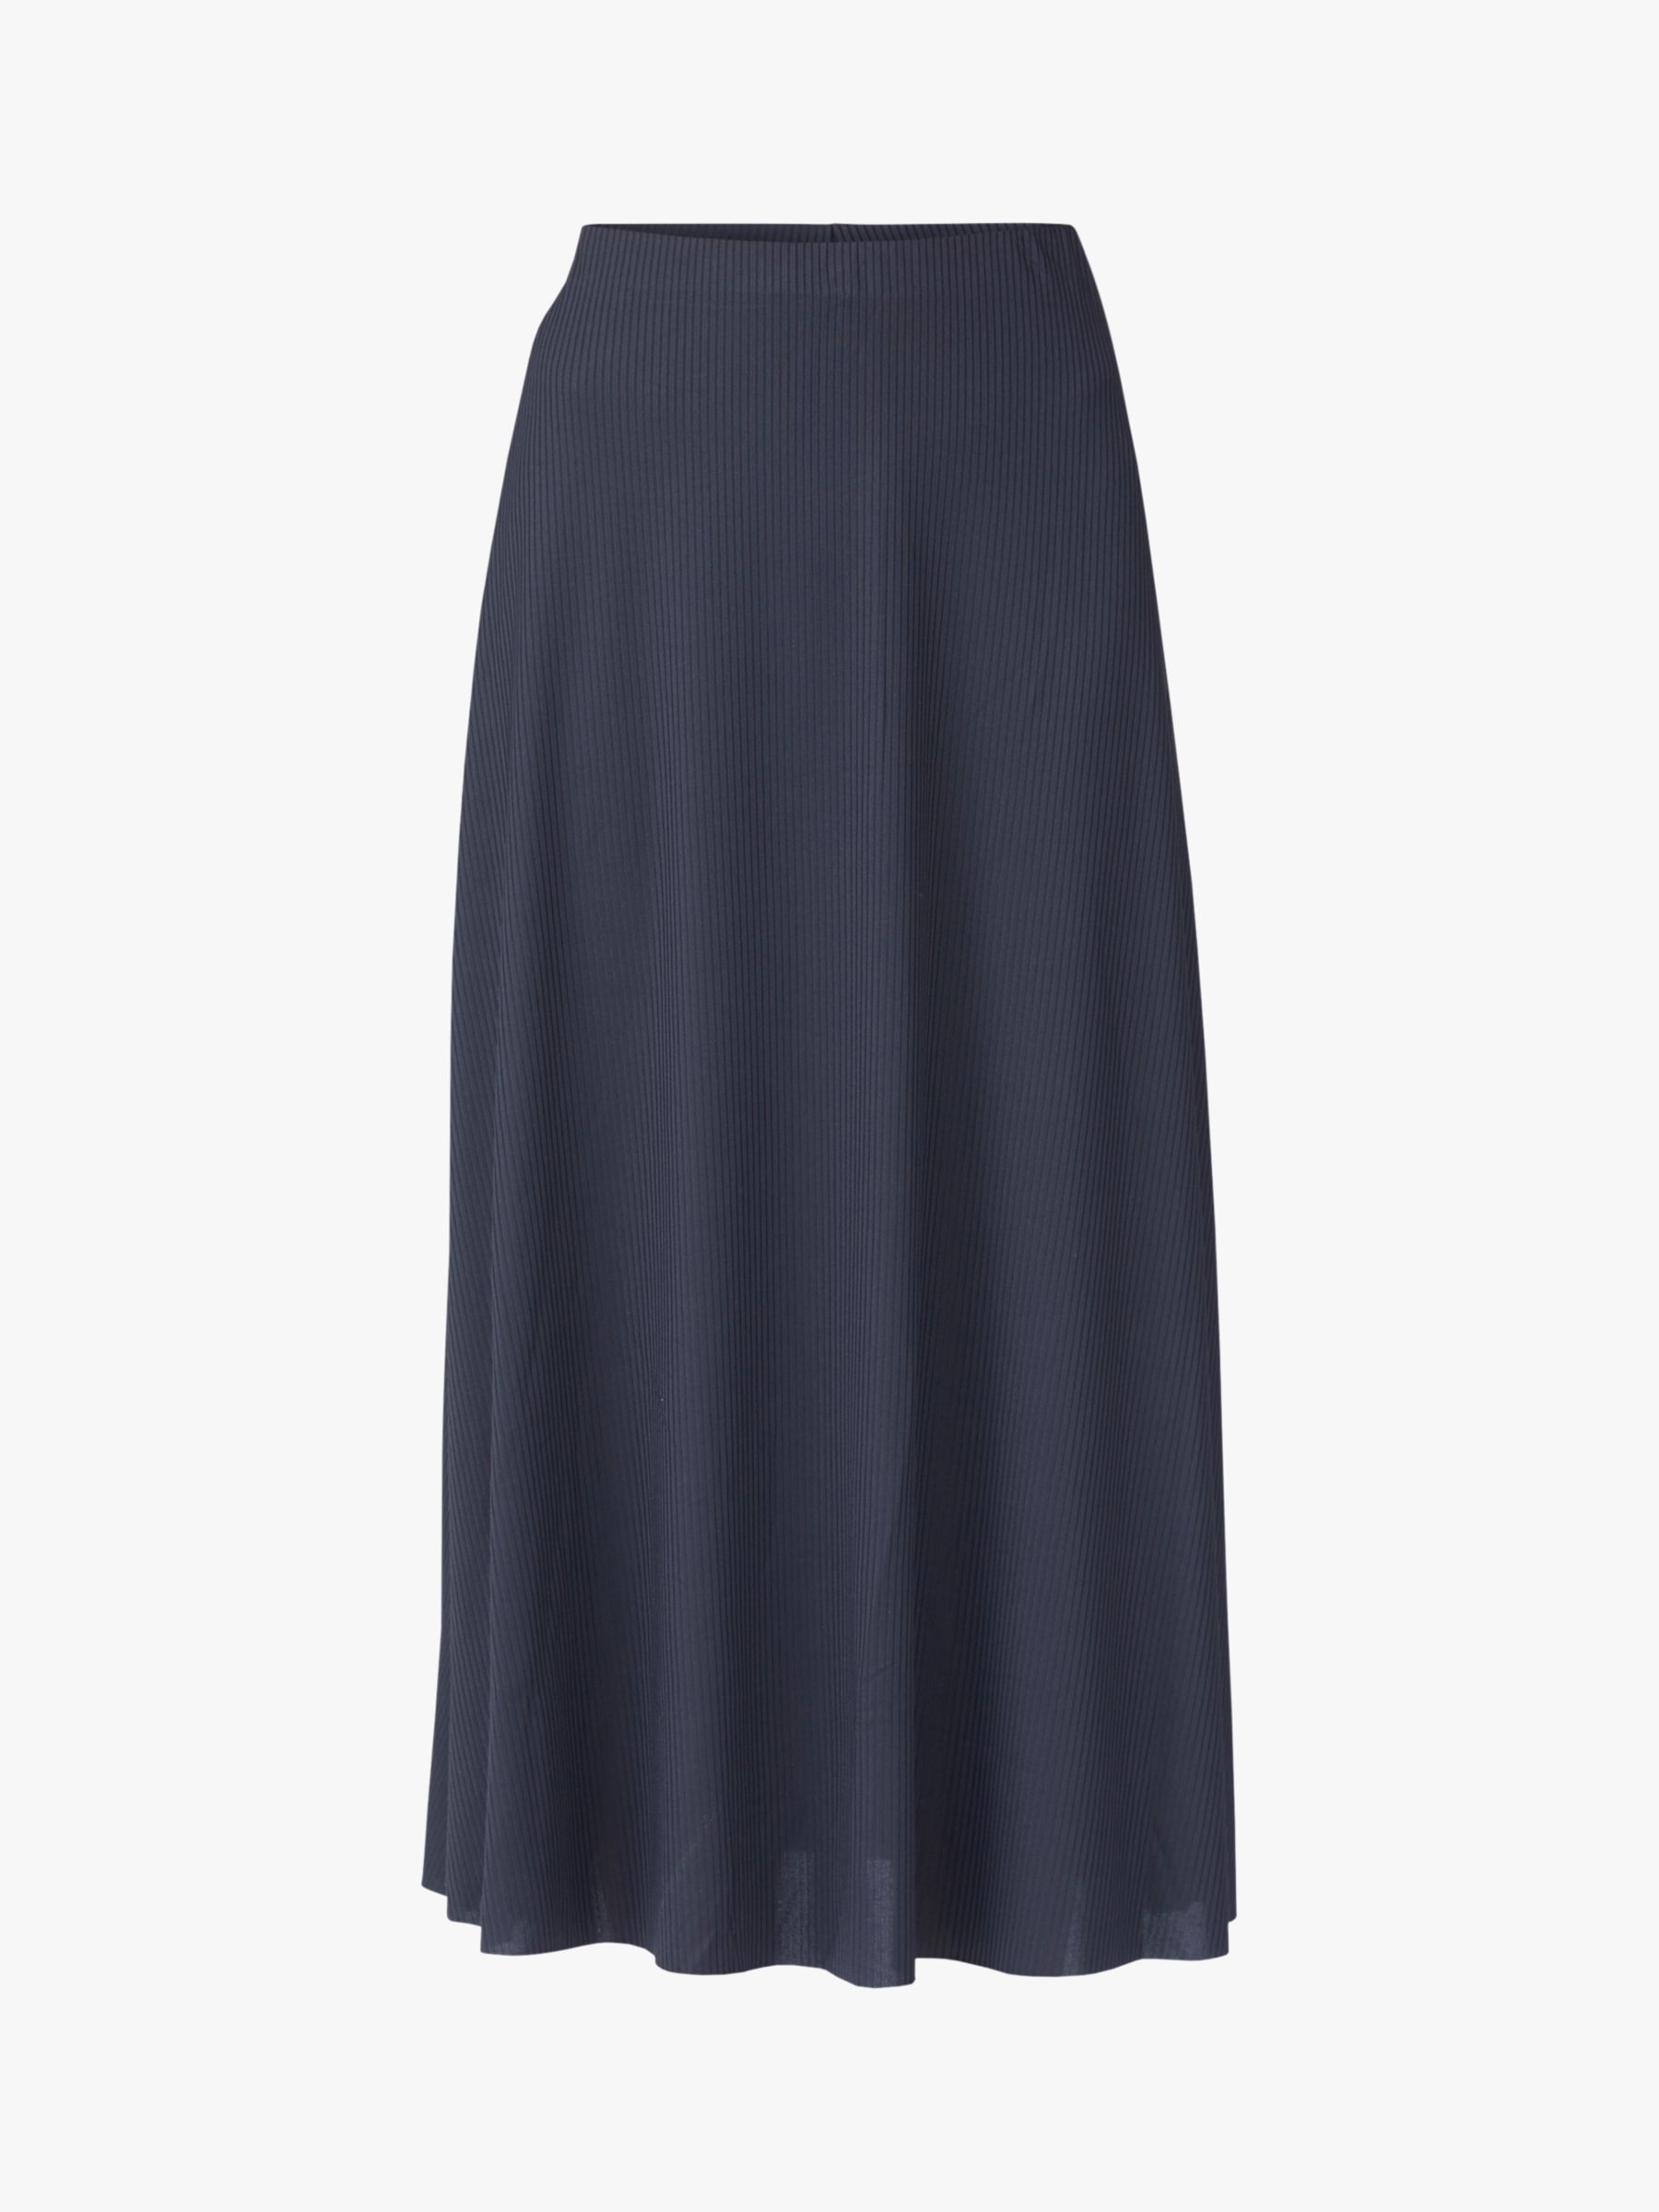 Buy Sisters Point Midi A-Line Skirt, Black Online at johnlewis.com